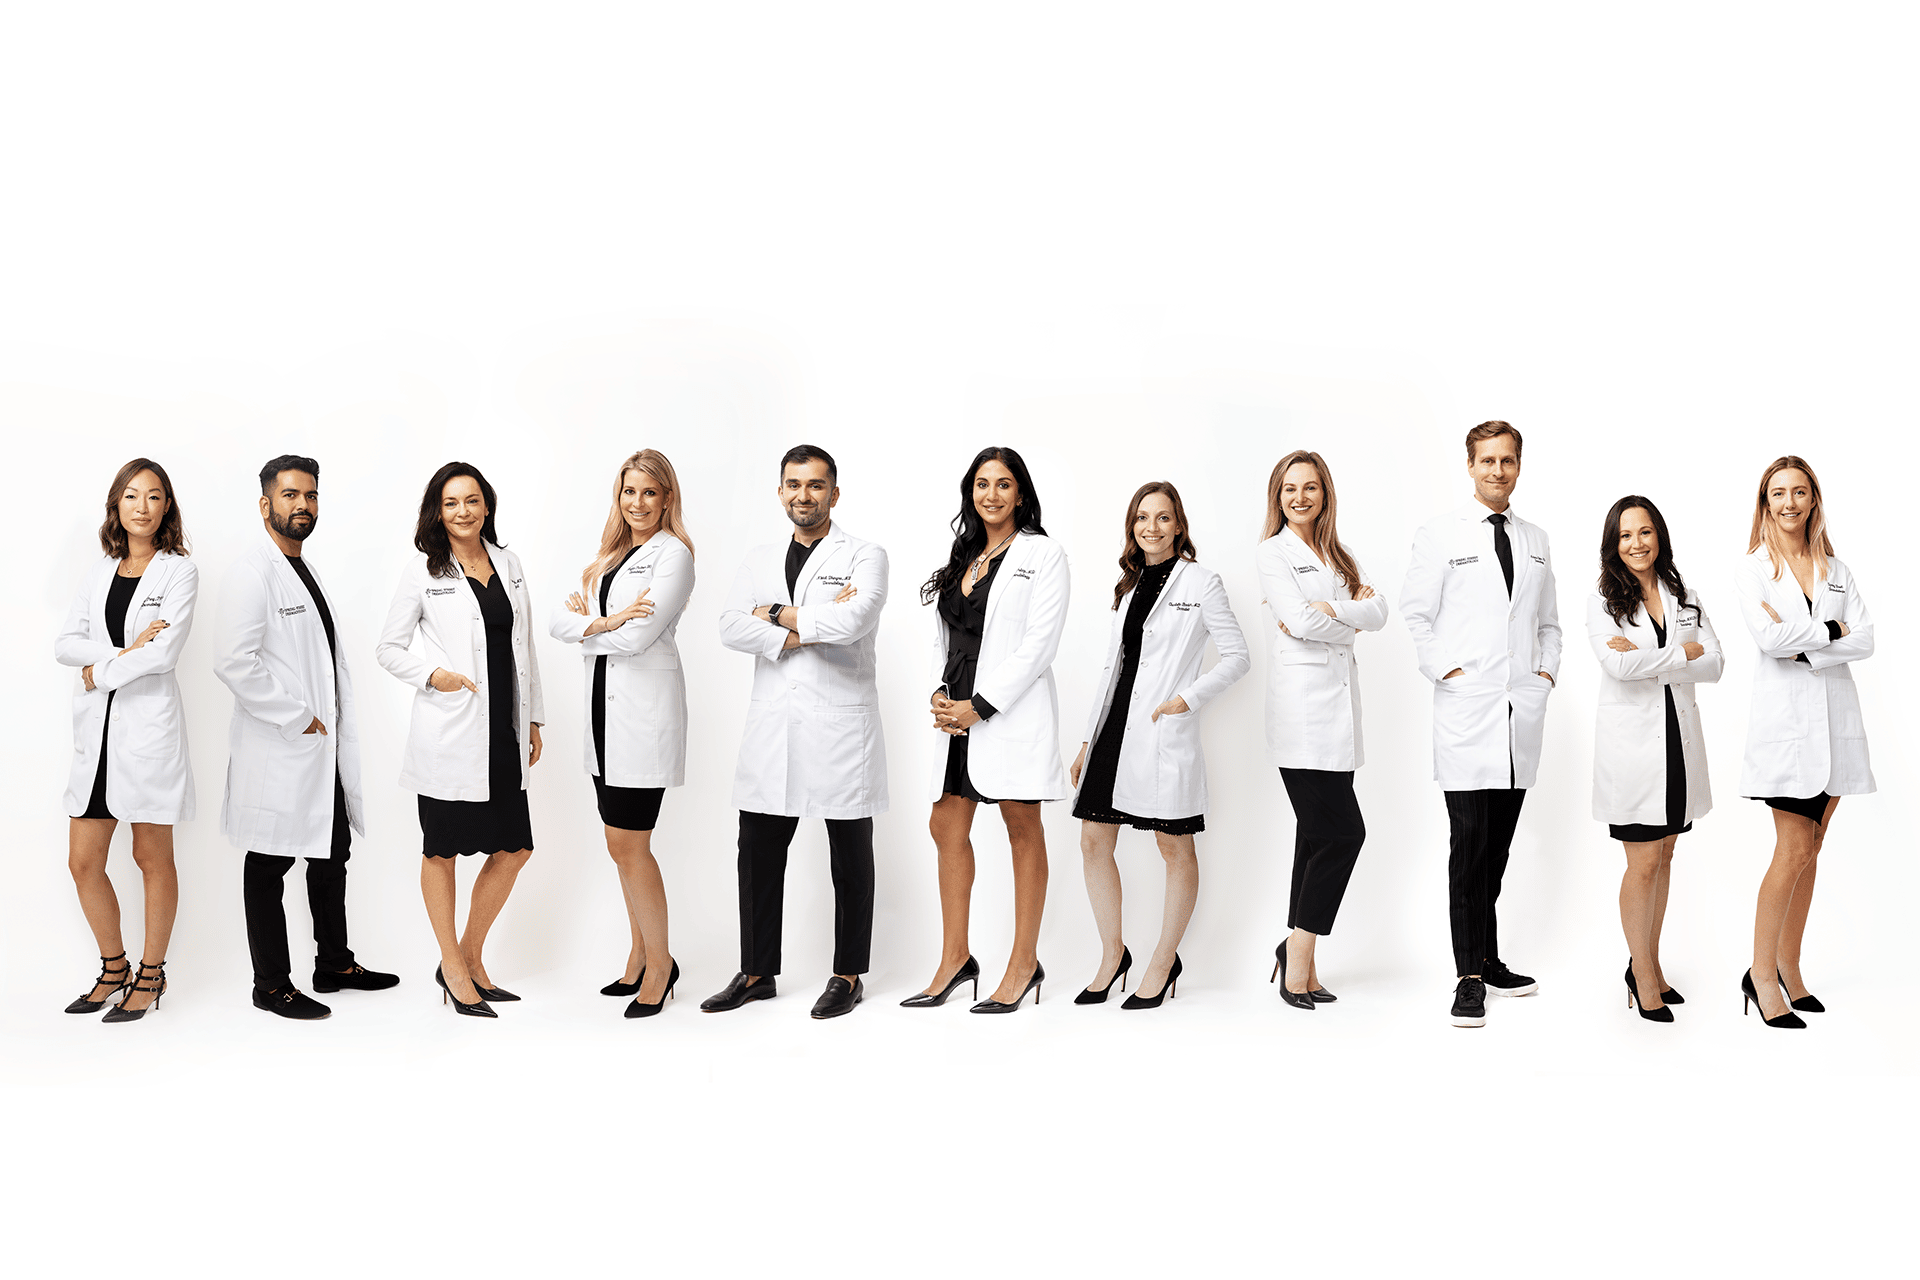 the dermatologists at Spring Street Dermatology in NYC, NY